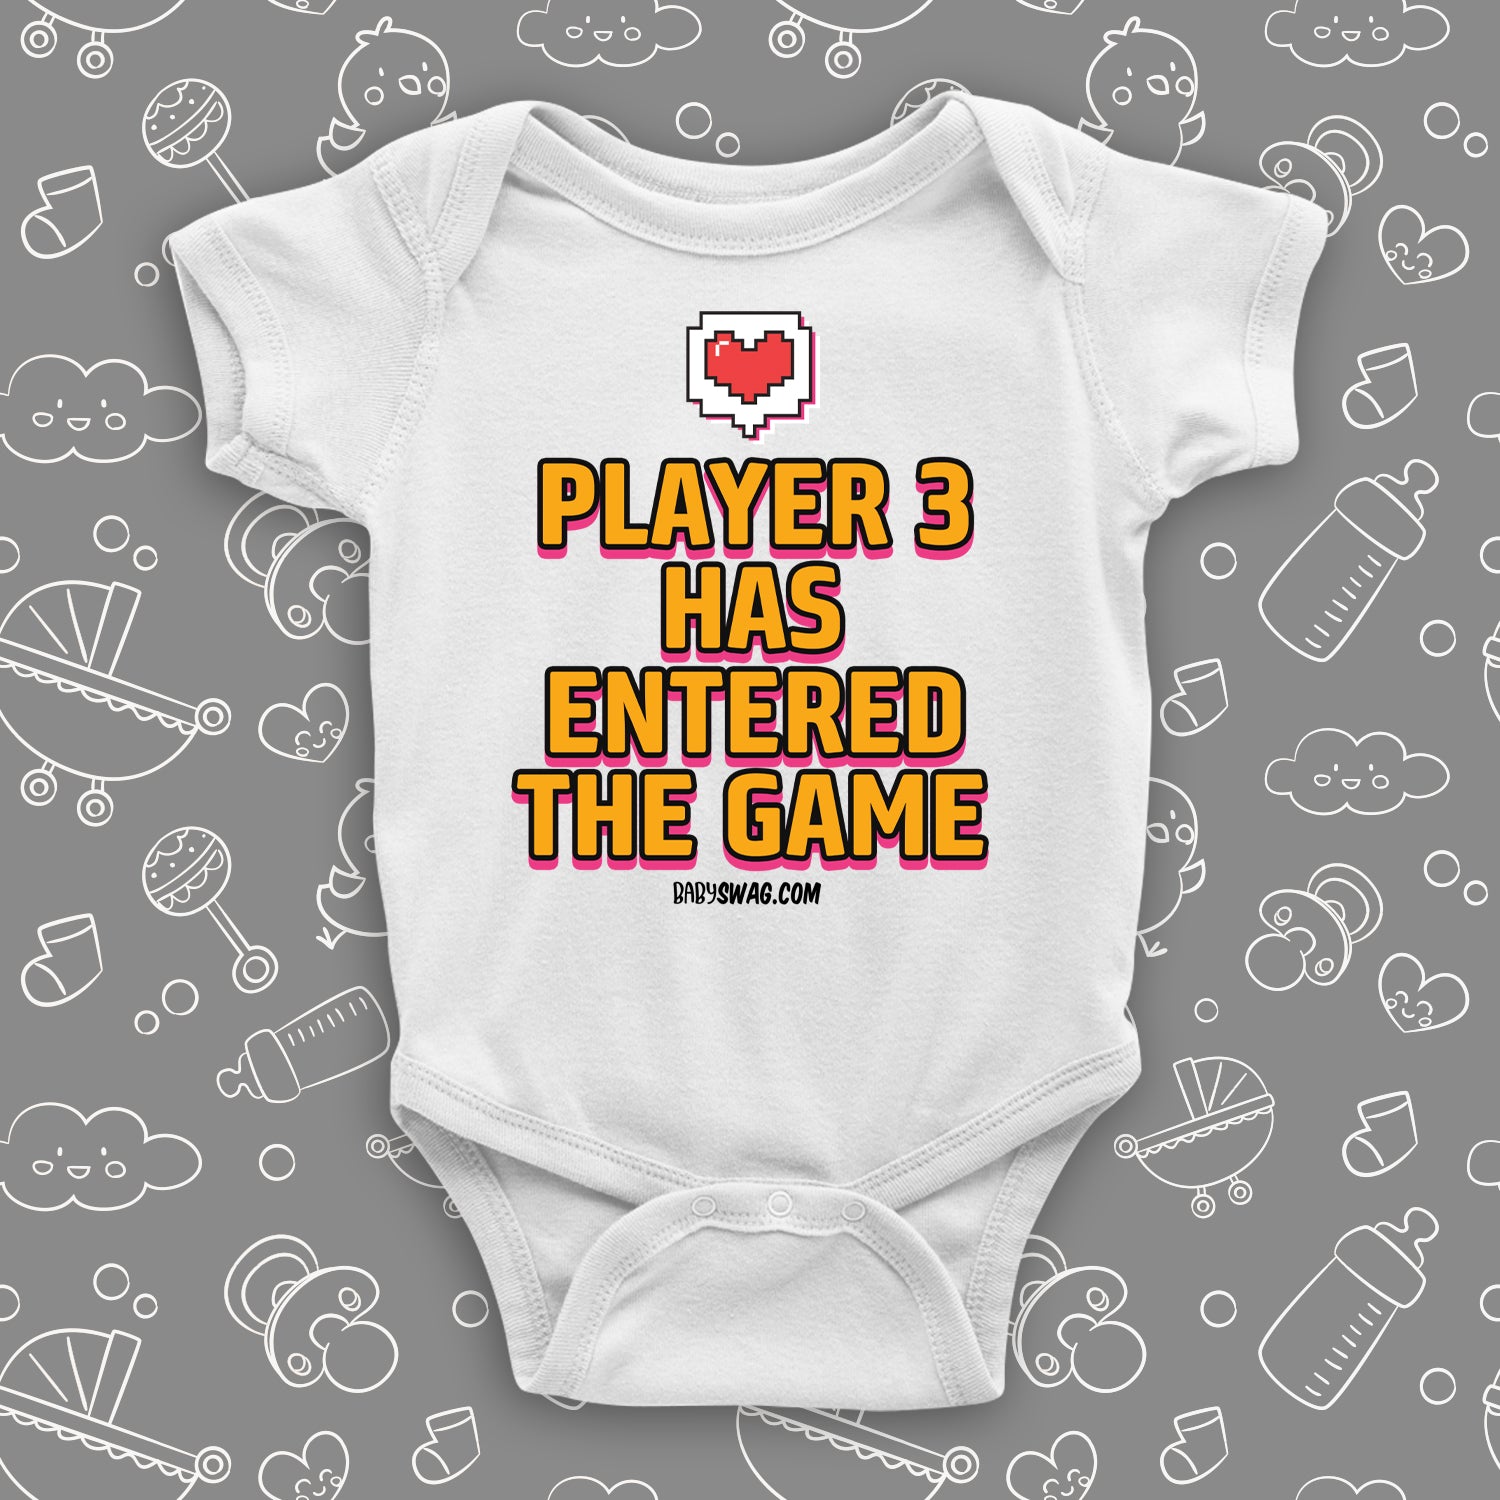 The "Player 3 Has Entered The Game" funny infant onesies in white.